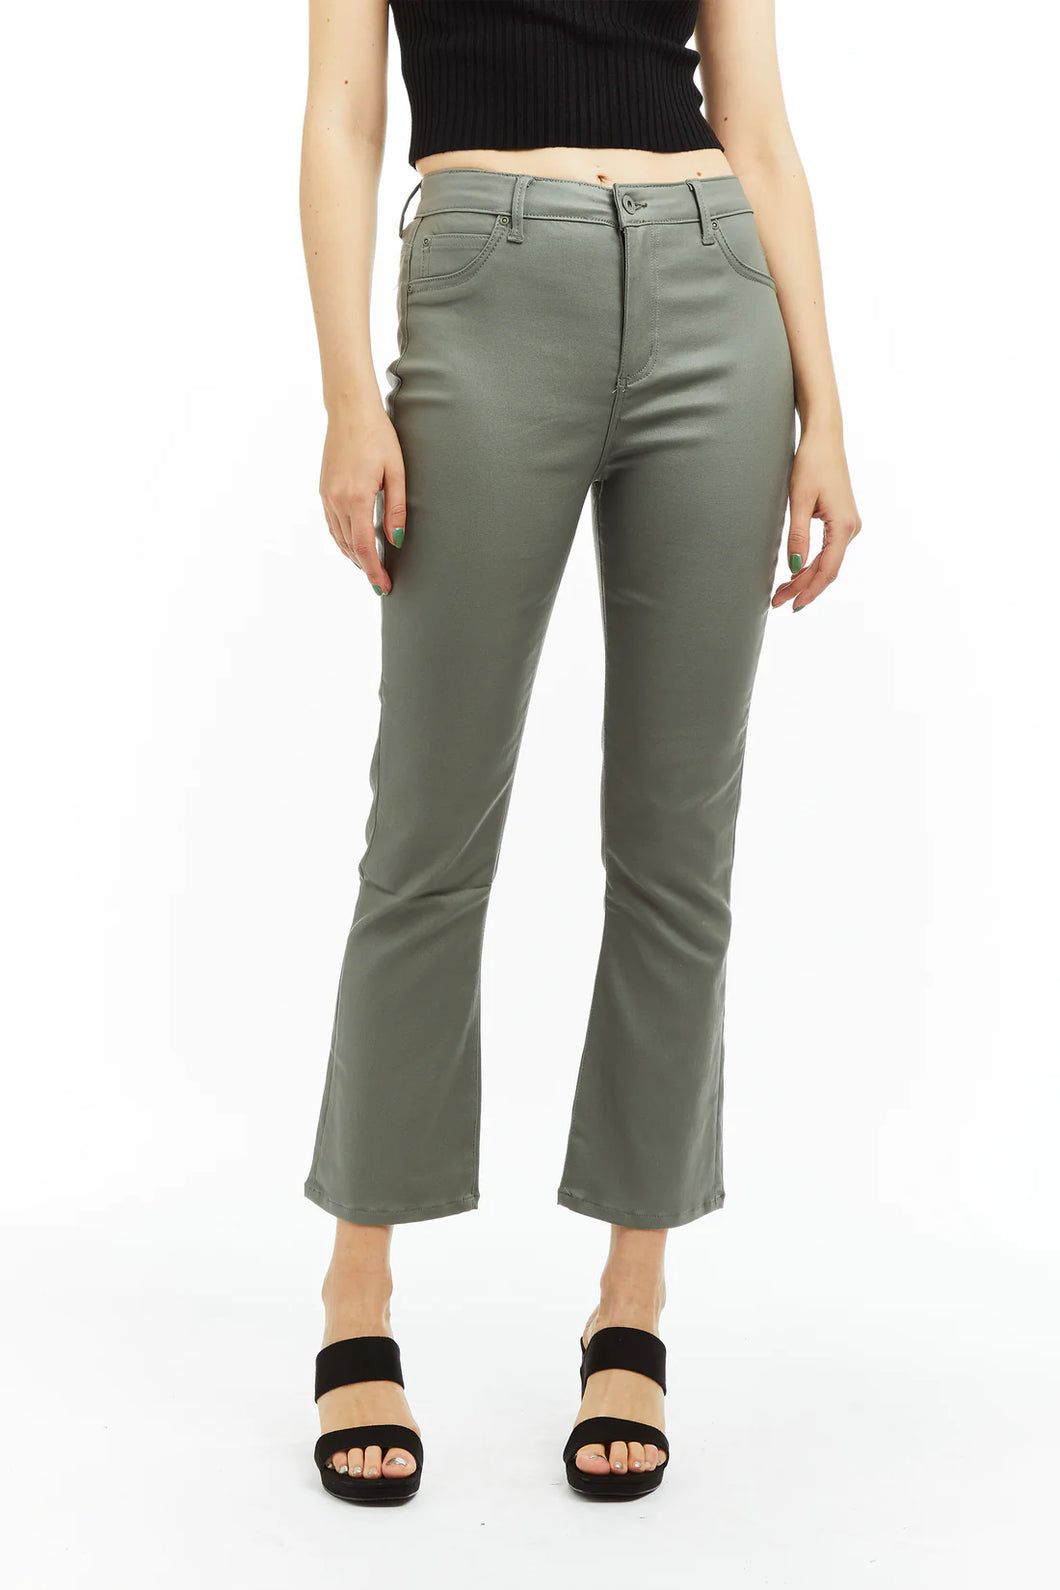 Sage High Rise Coated Ankle Crop Flare Denim by Tractr